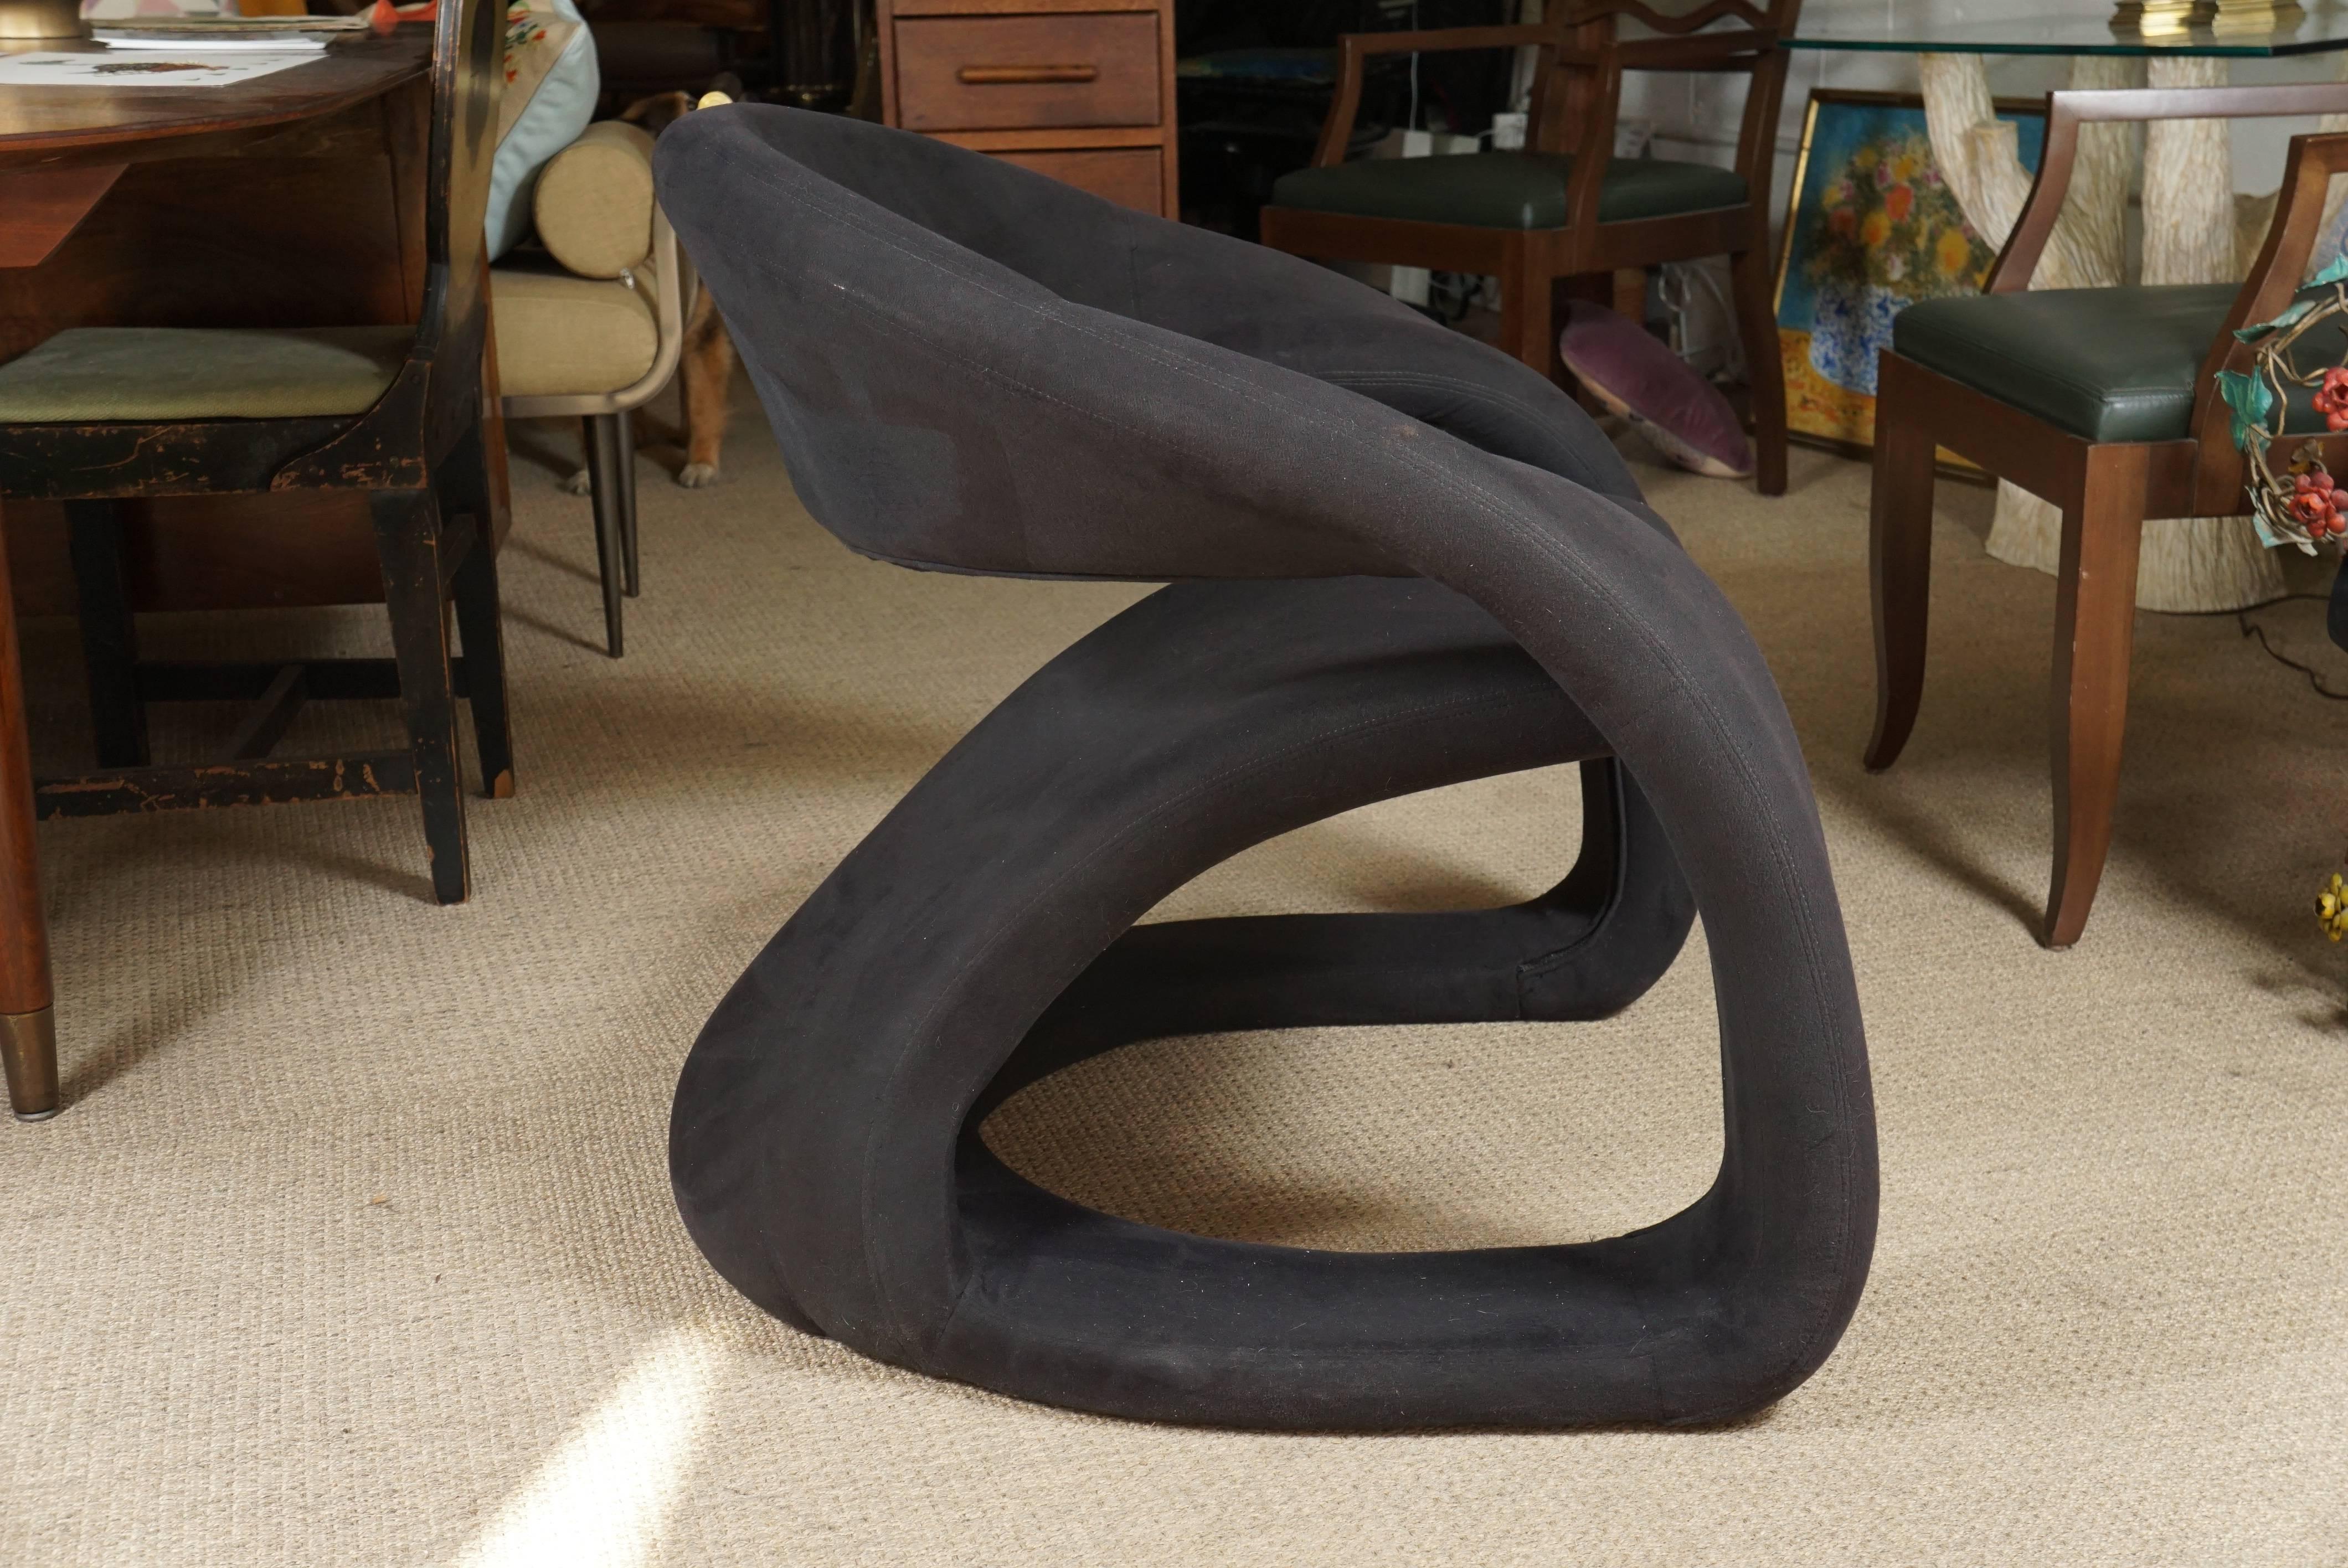 Here is a modern curved chair in black. This stylish ergonomic chair is very comfortable and has a great fitted curved back support.